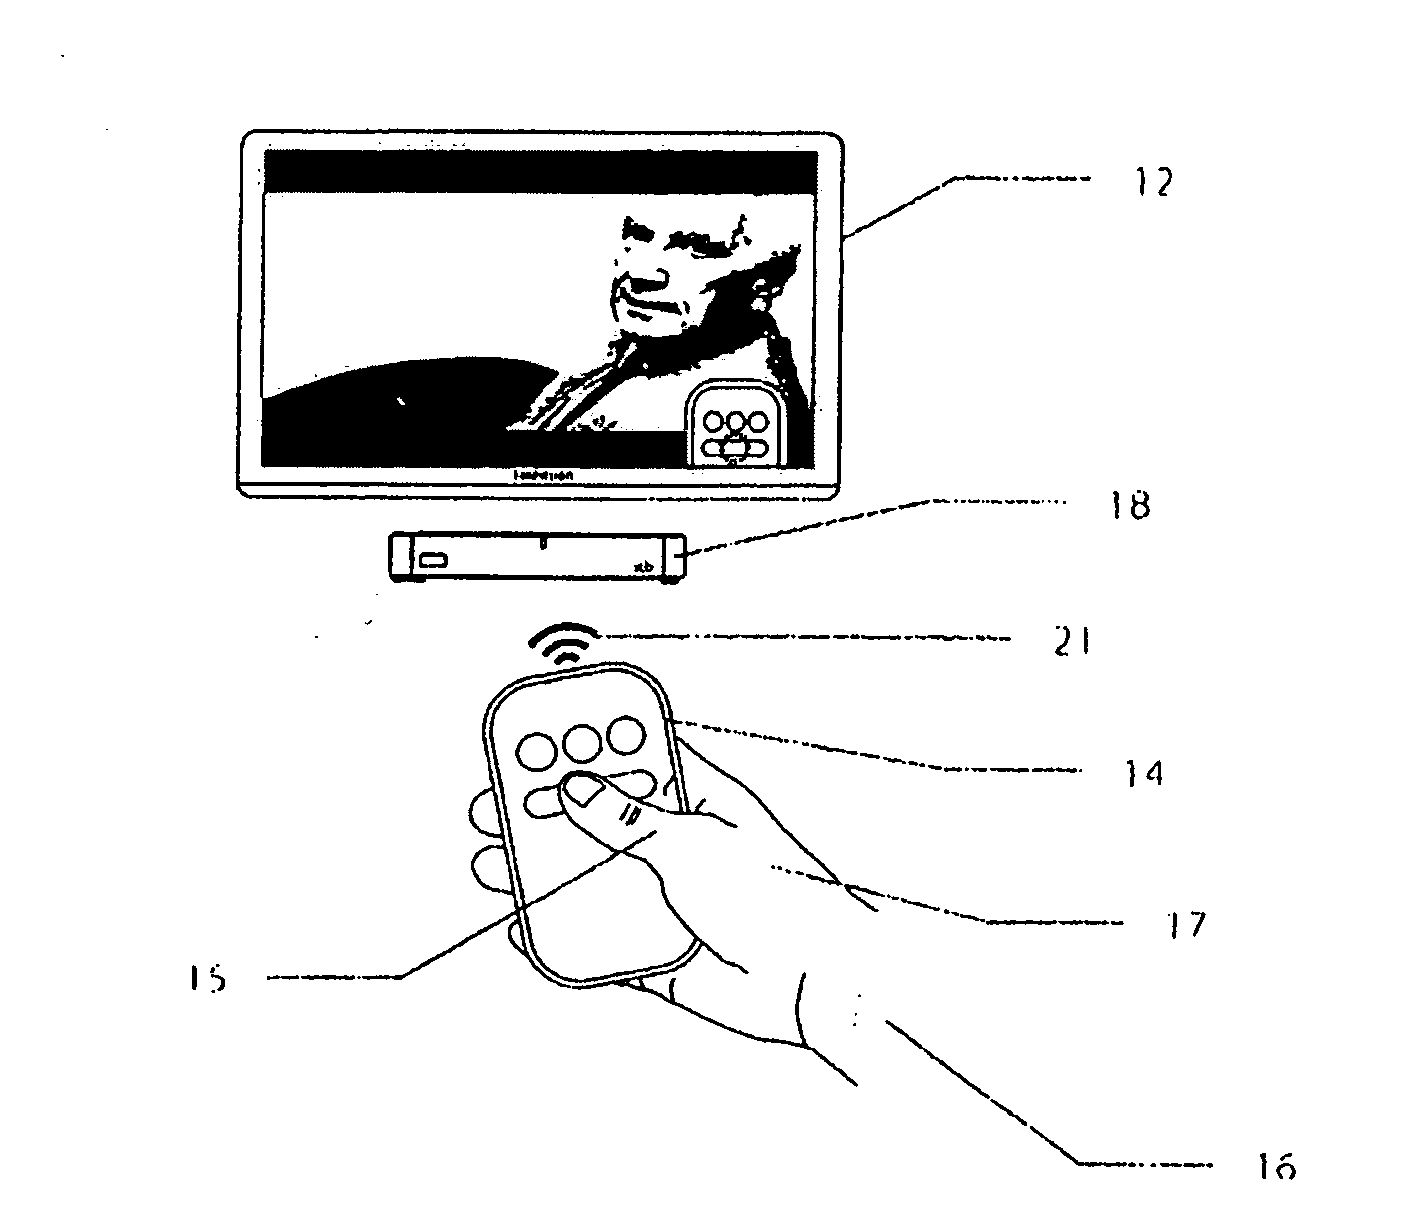 Remote Control System for Remotely Controlling an Electronic Card Connected to a Television Screen or Monitor and Associated Method for Transmitting Control Signals